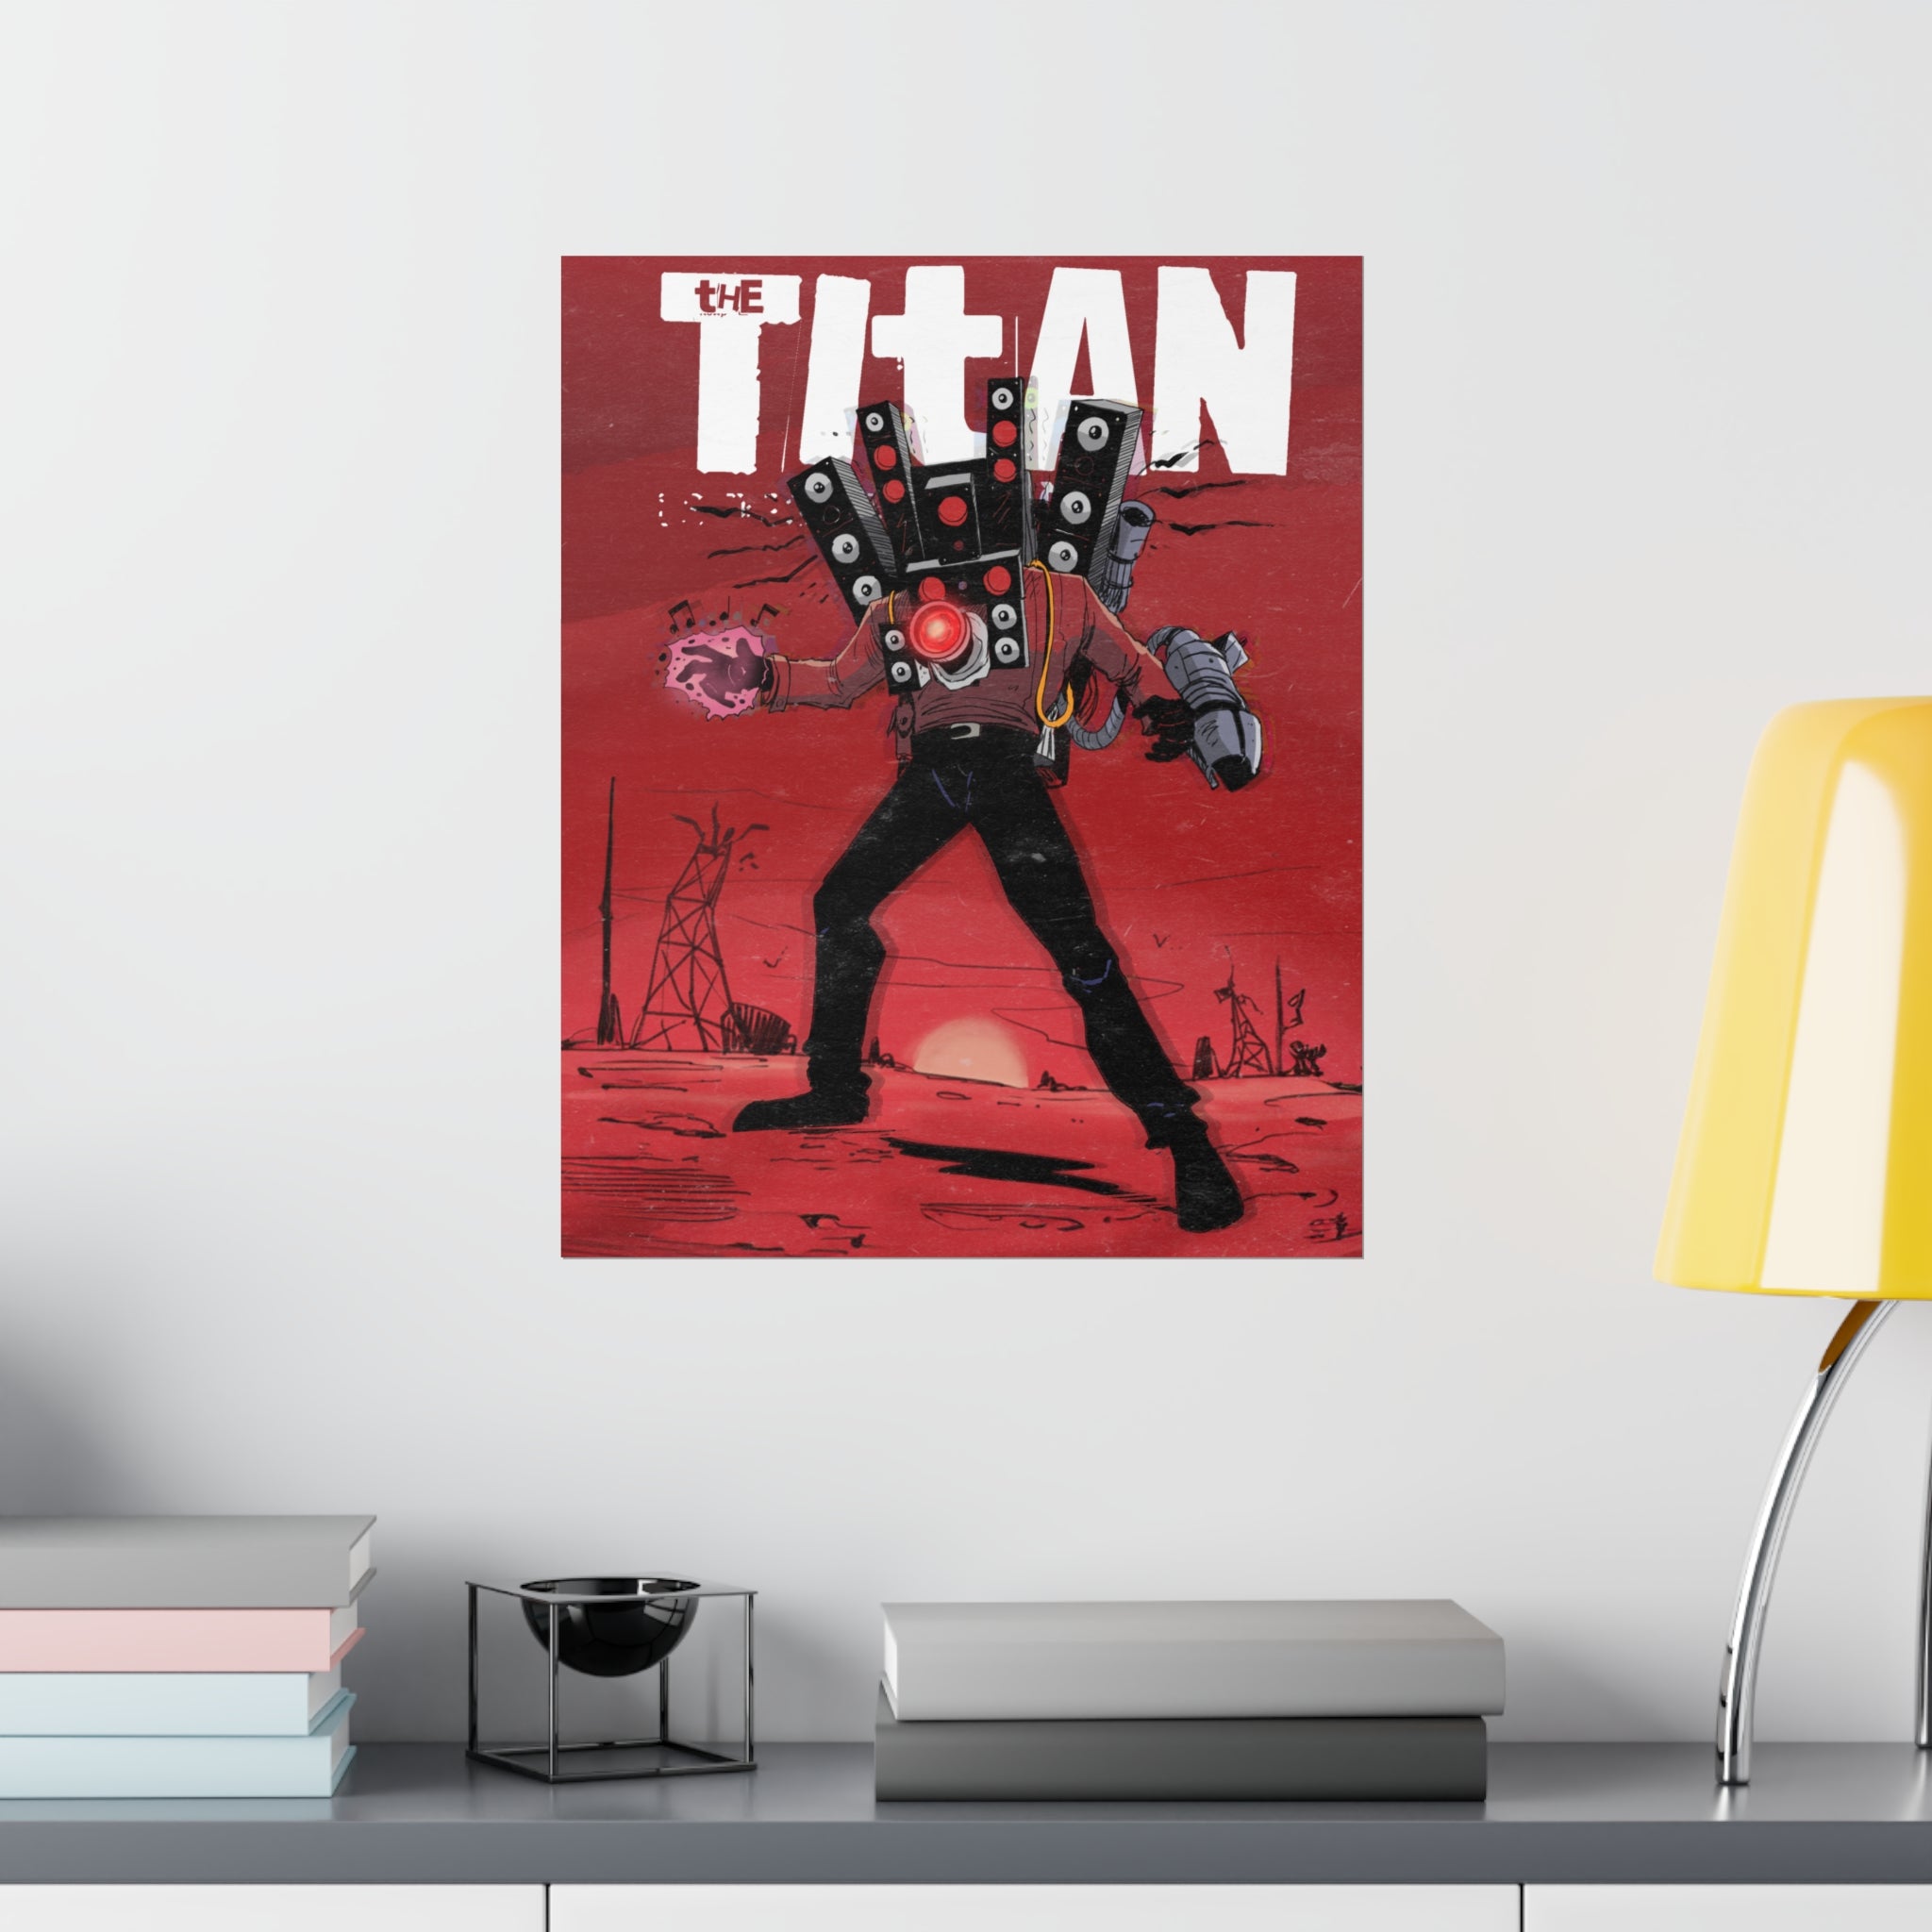 Artistic poster of Titan Speakerman against a red background. its on a white wall with lamp books shelf